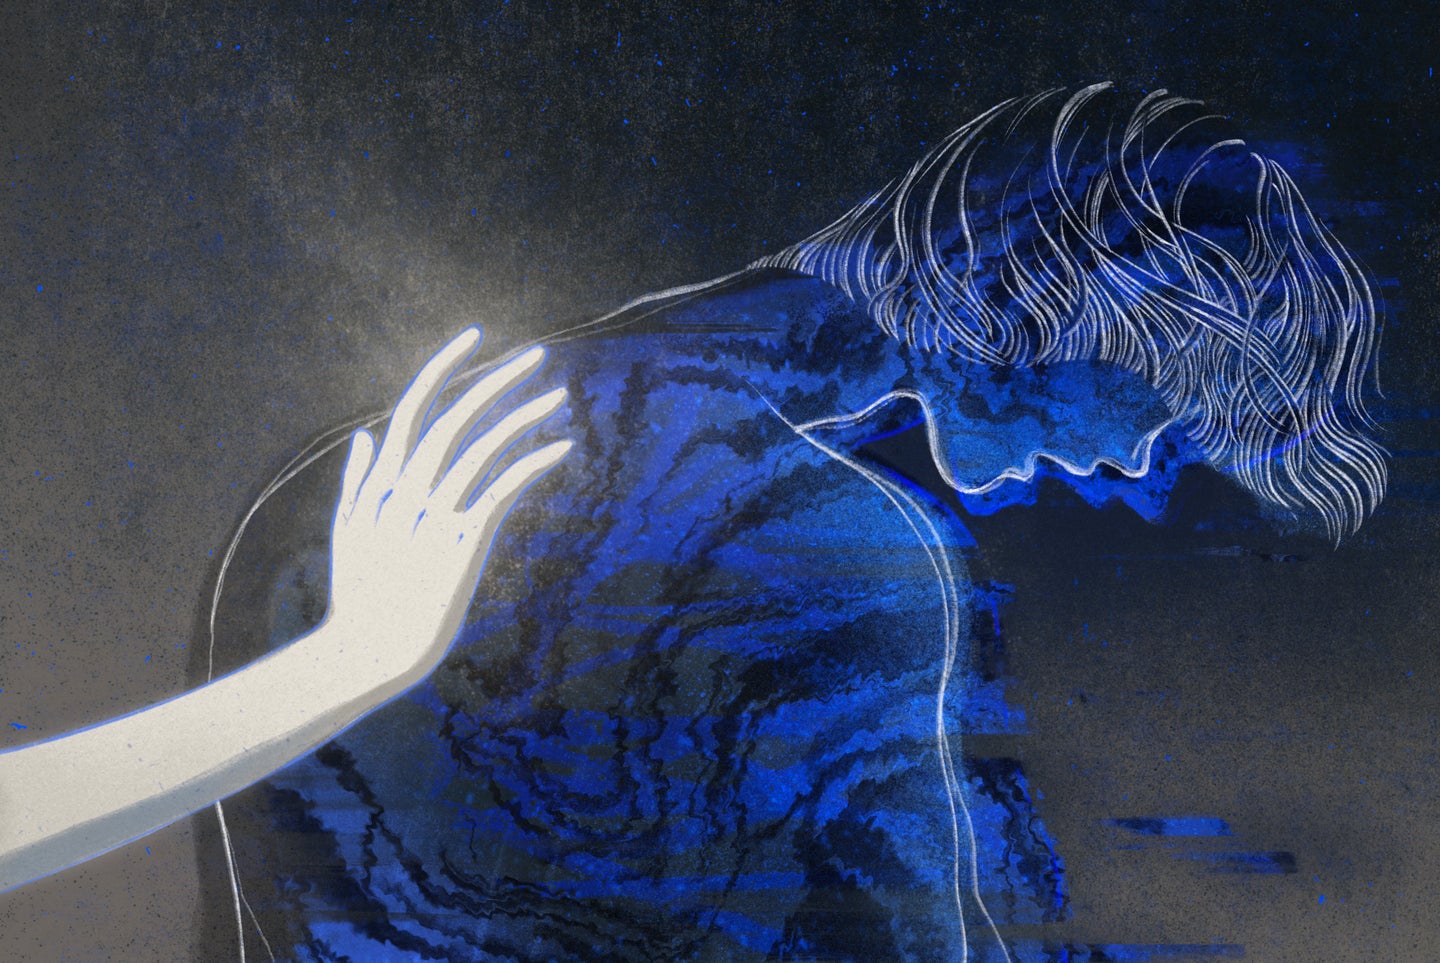 an illustration of a sad blue person with a glowing white hand reaching out to comfort them